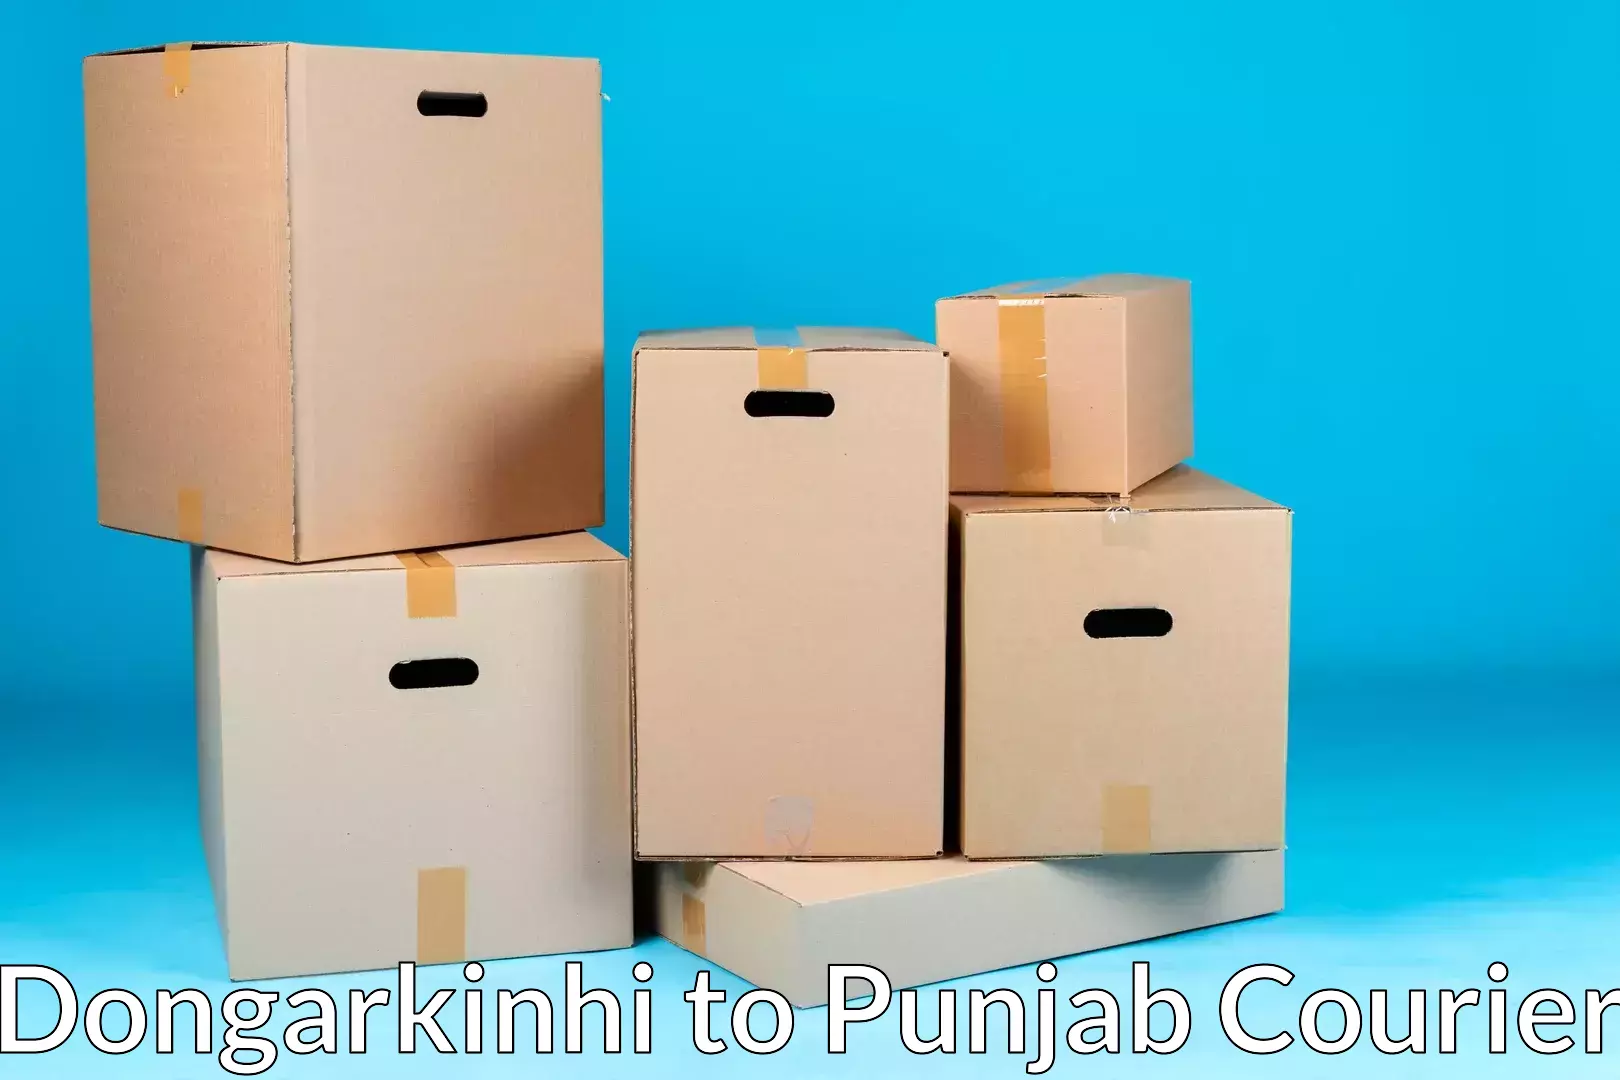 Full-service household moving in Dongarkinhi to Dhuri